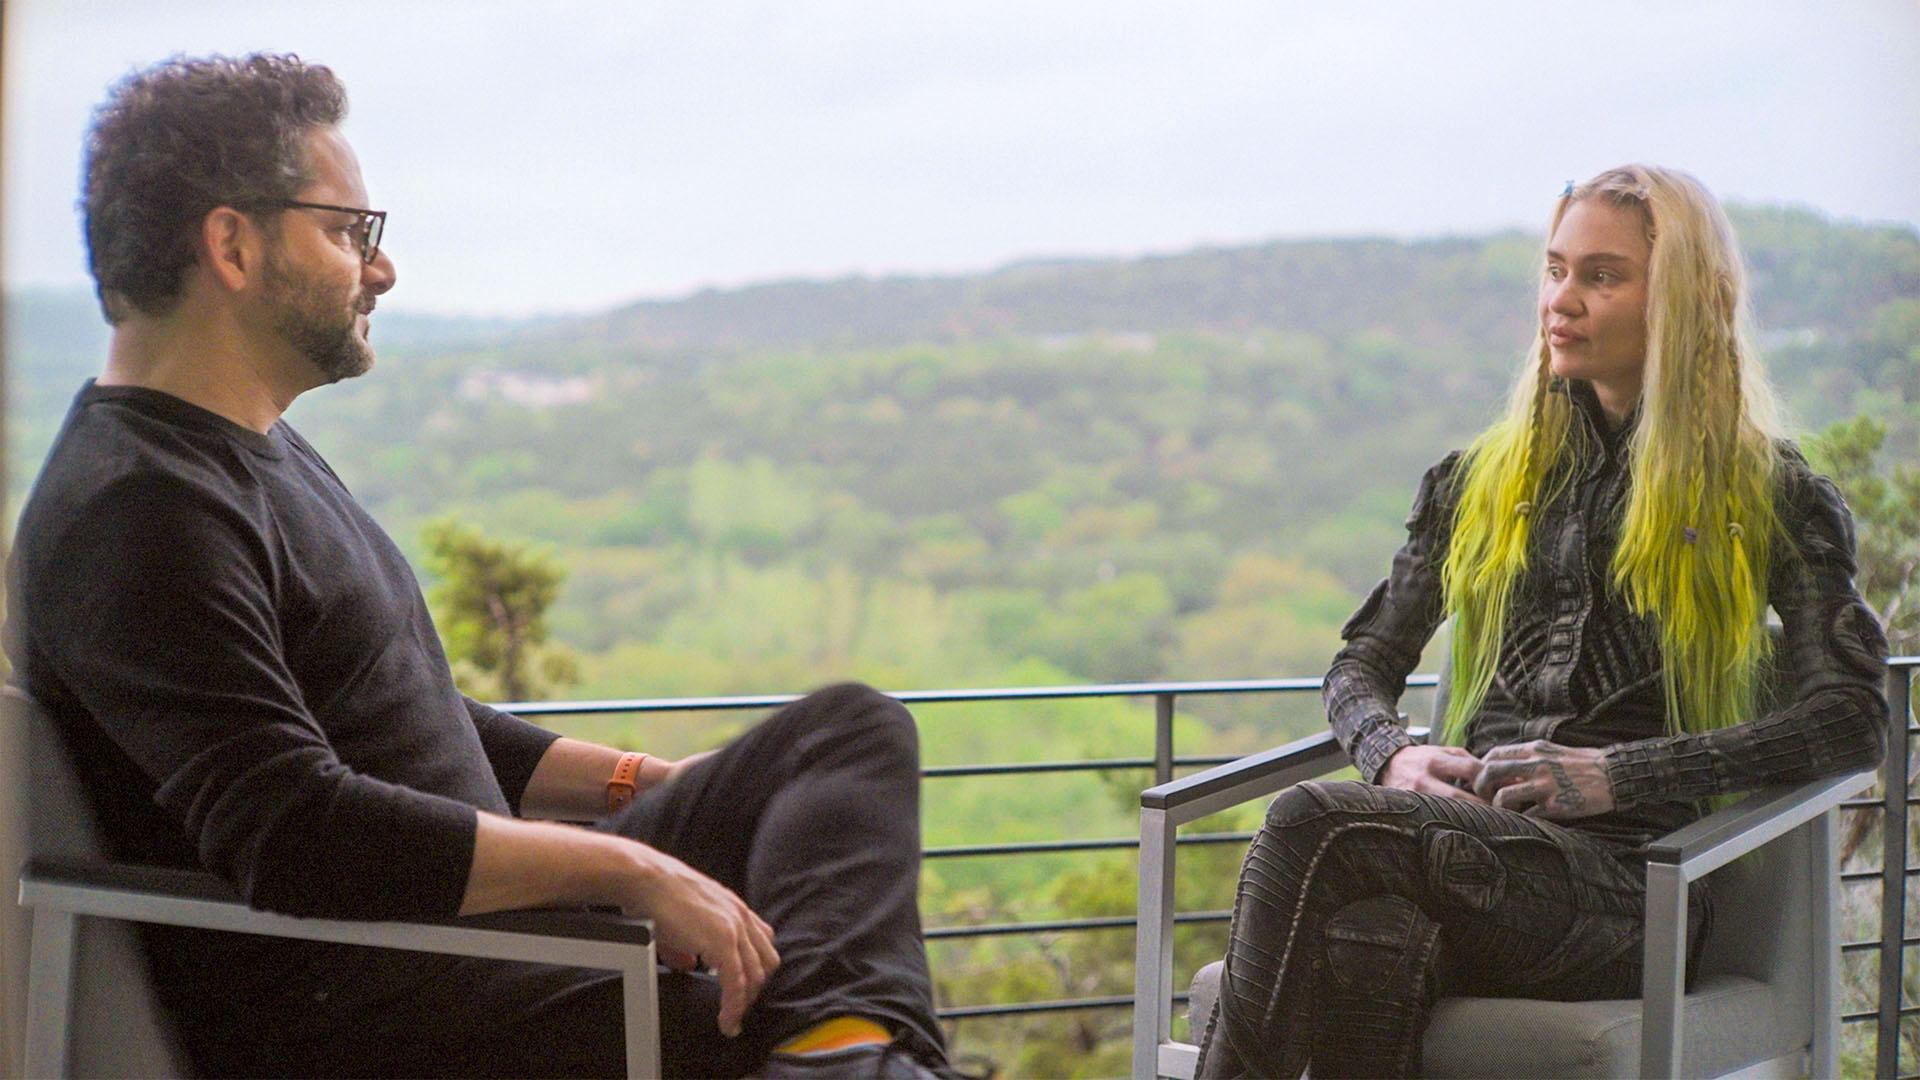 Ari Wallach sits with Grimes on a balcony that looks over a mountain horizon. 